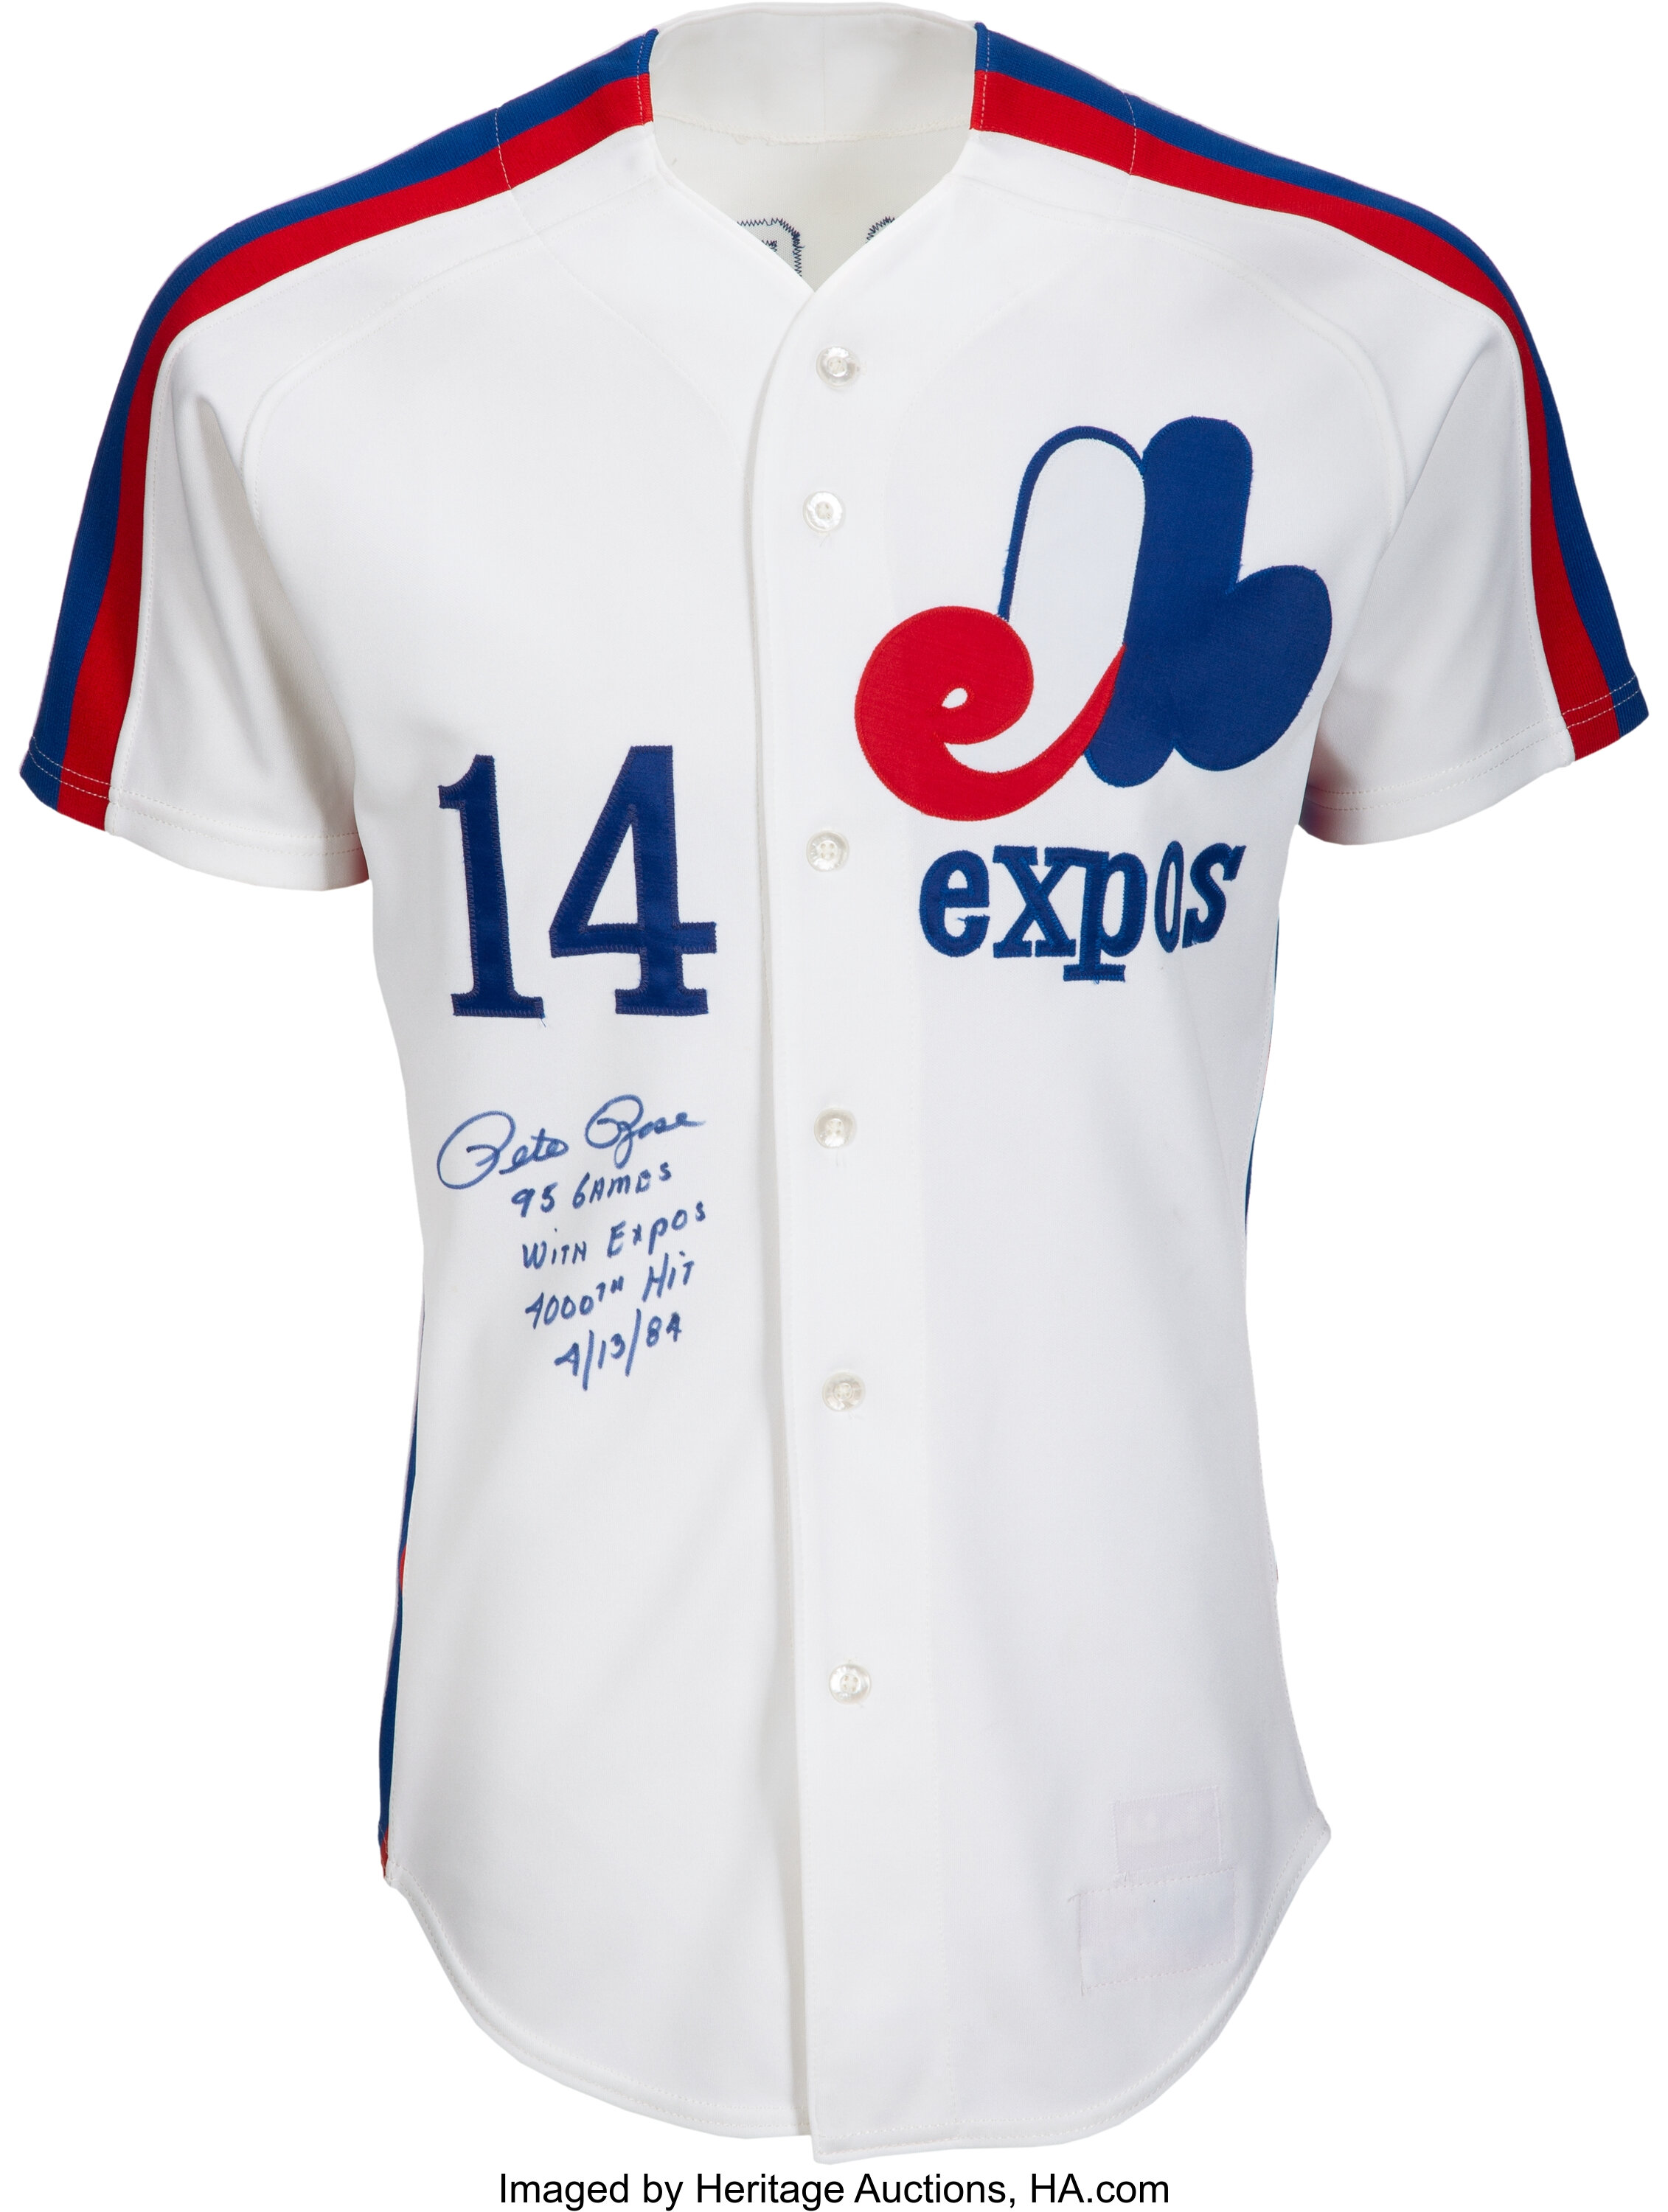 Montreal Expos 1969 replica spring training jersey men's large New W Tags  red